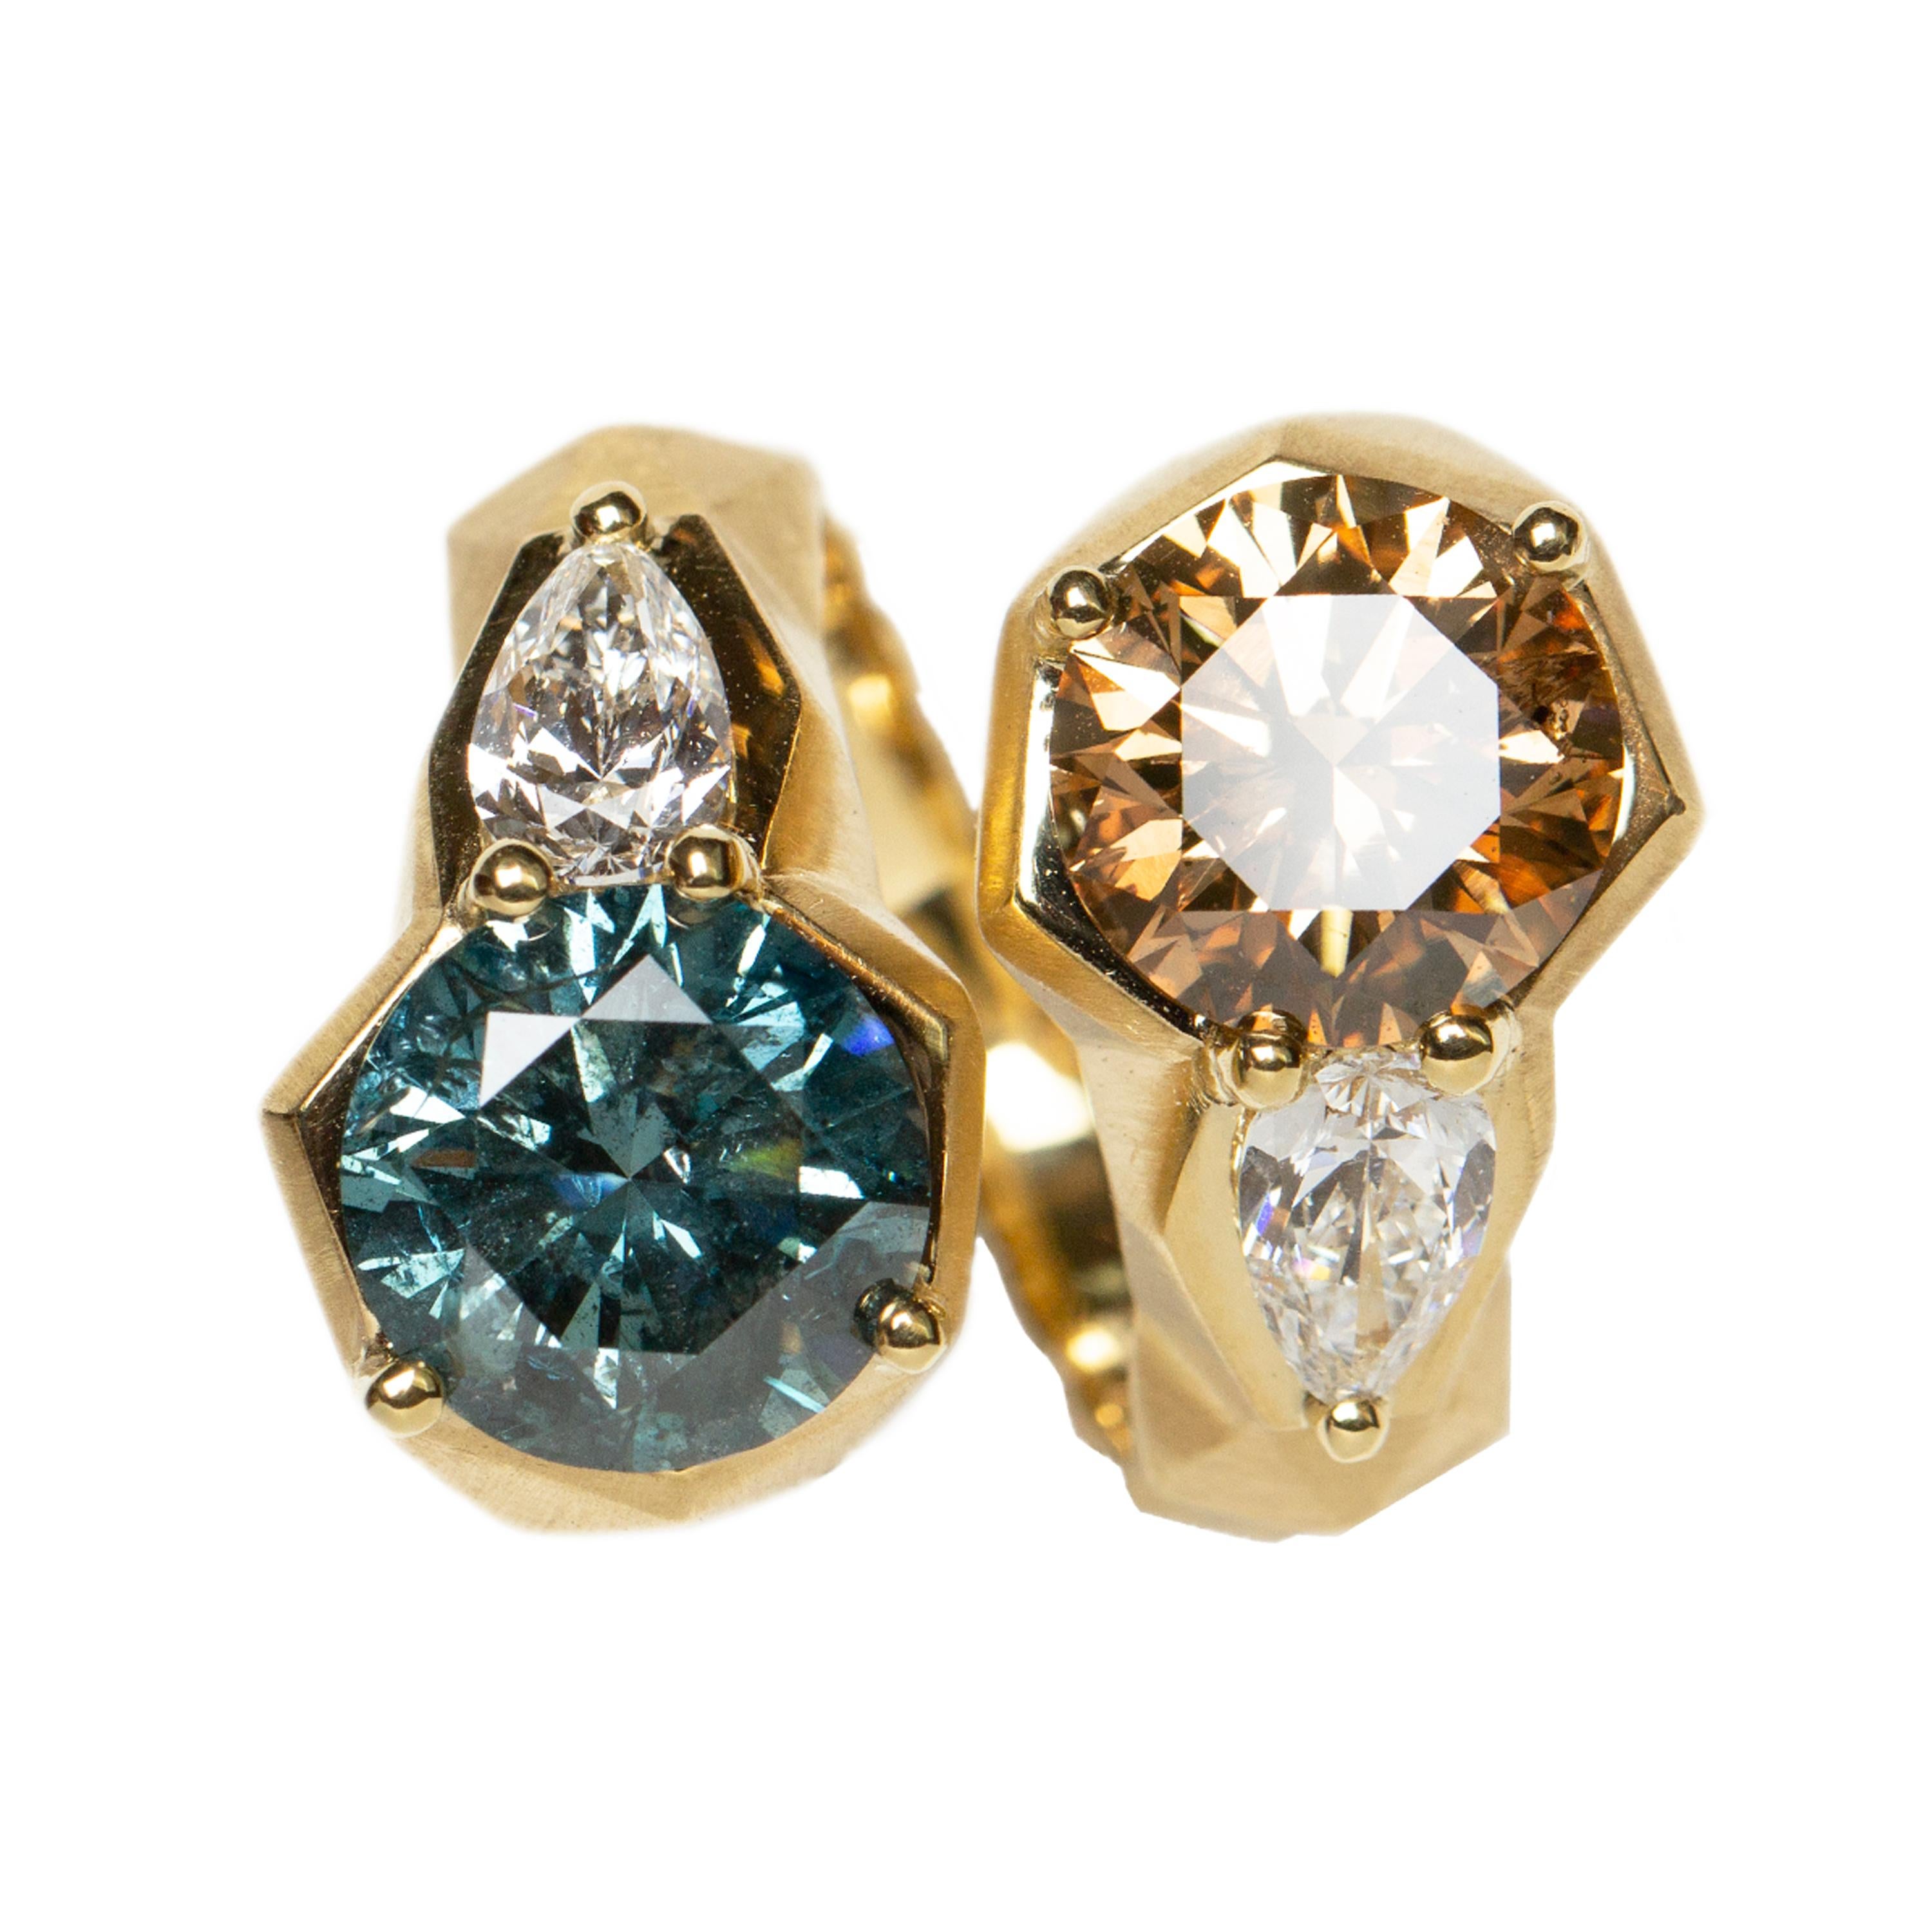 Designed exclusively by Ara Vartanian, this 18k Yellow Gold Ring features Blue, Brown and two White Diamonds. 
For this ring is made exclusively by Ara Vartanian, bespoke alterations can be accommodated, such as changes in metals, gemstones, stone